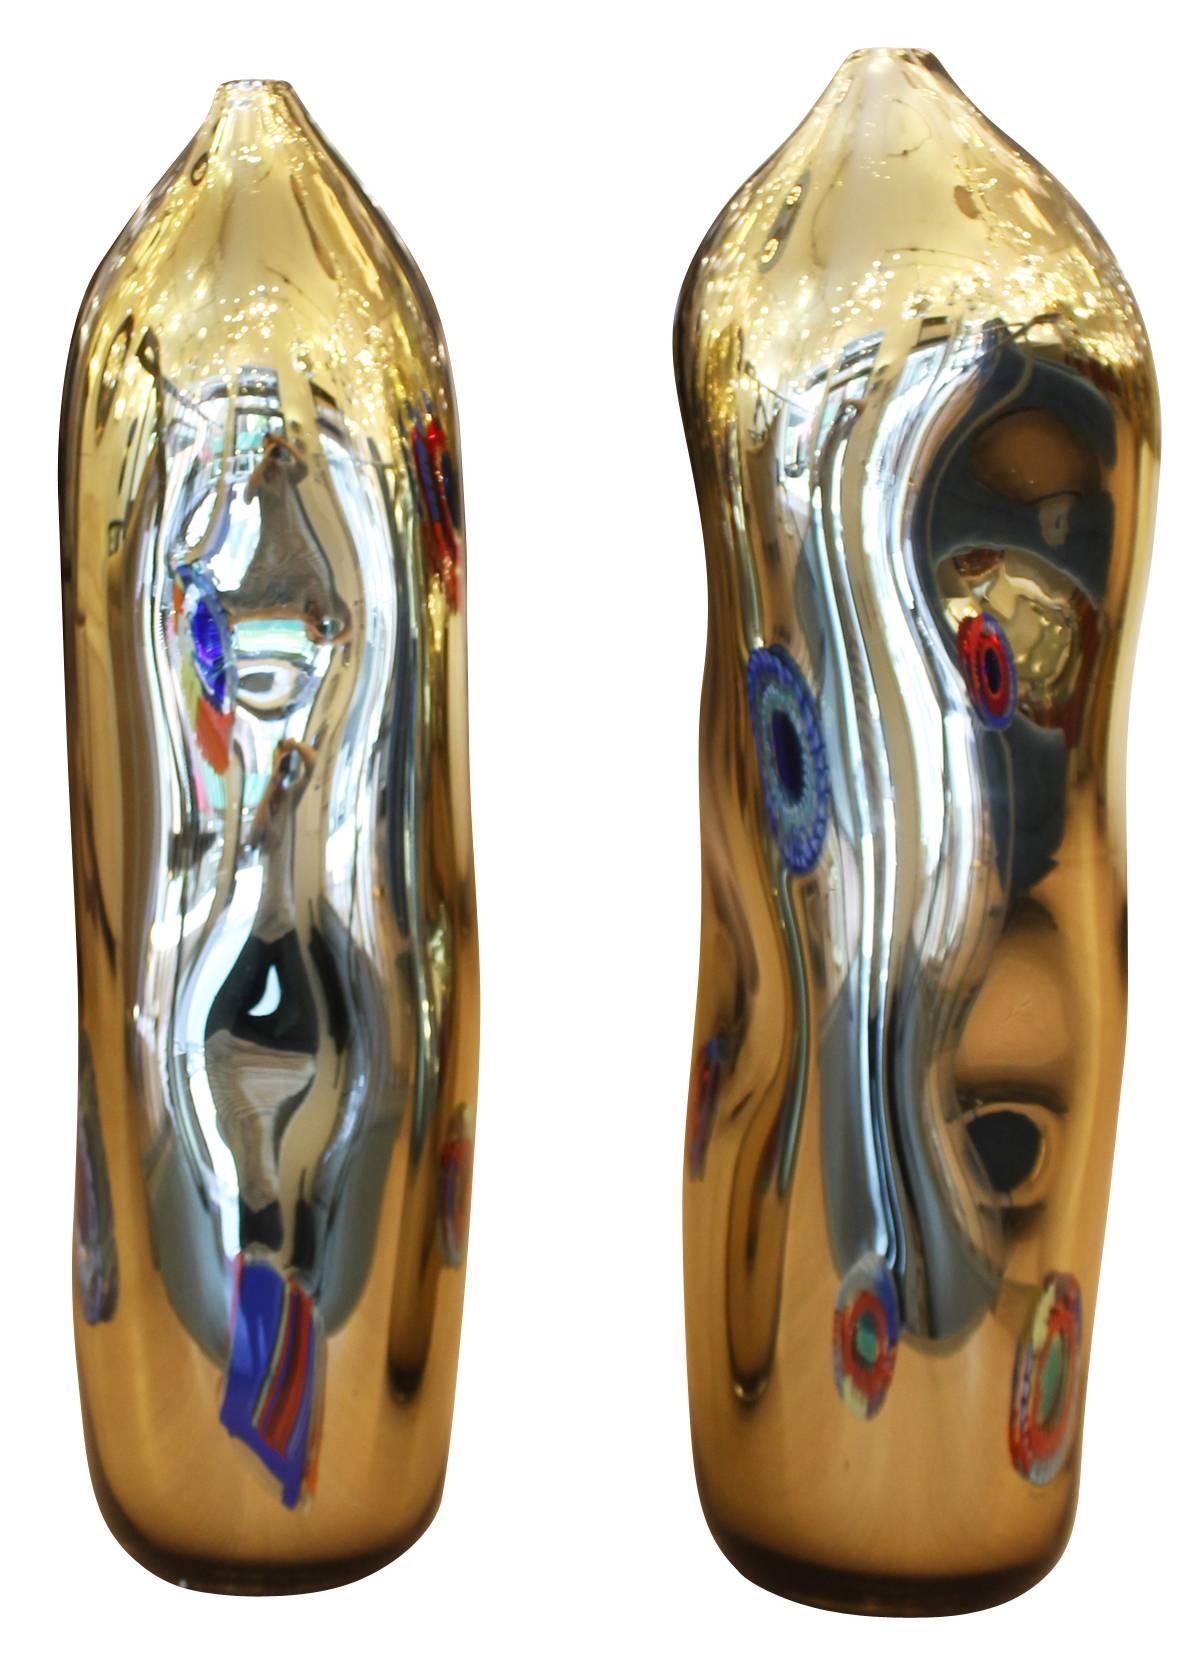 Decorative Murano vases by master glassblower Dona'. They have been formed to have an extraordinary 